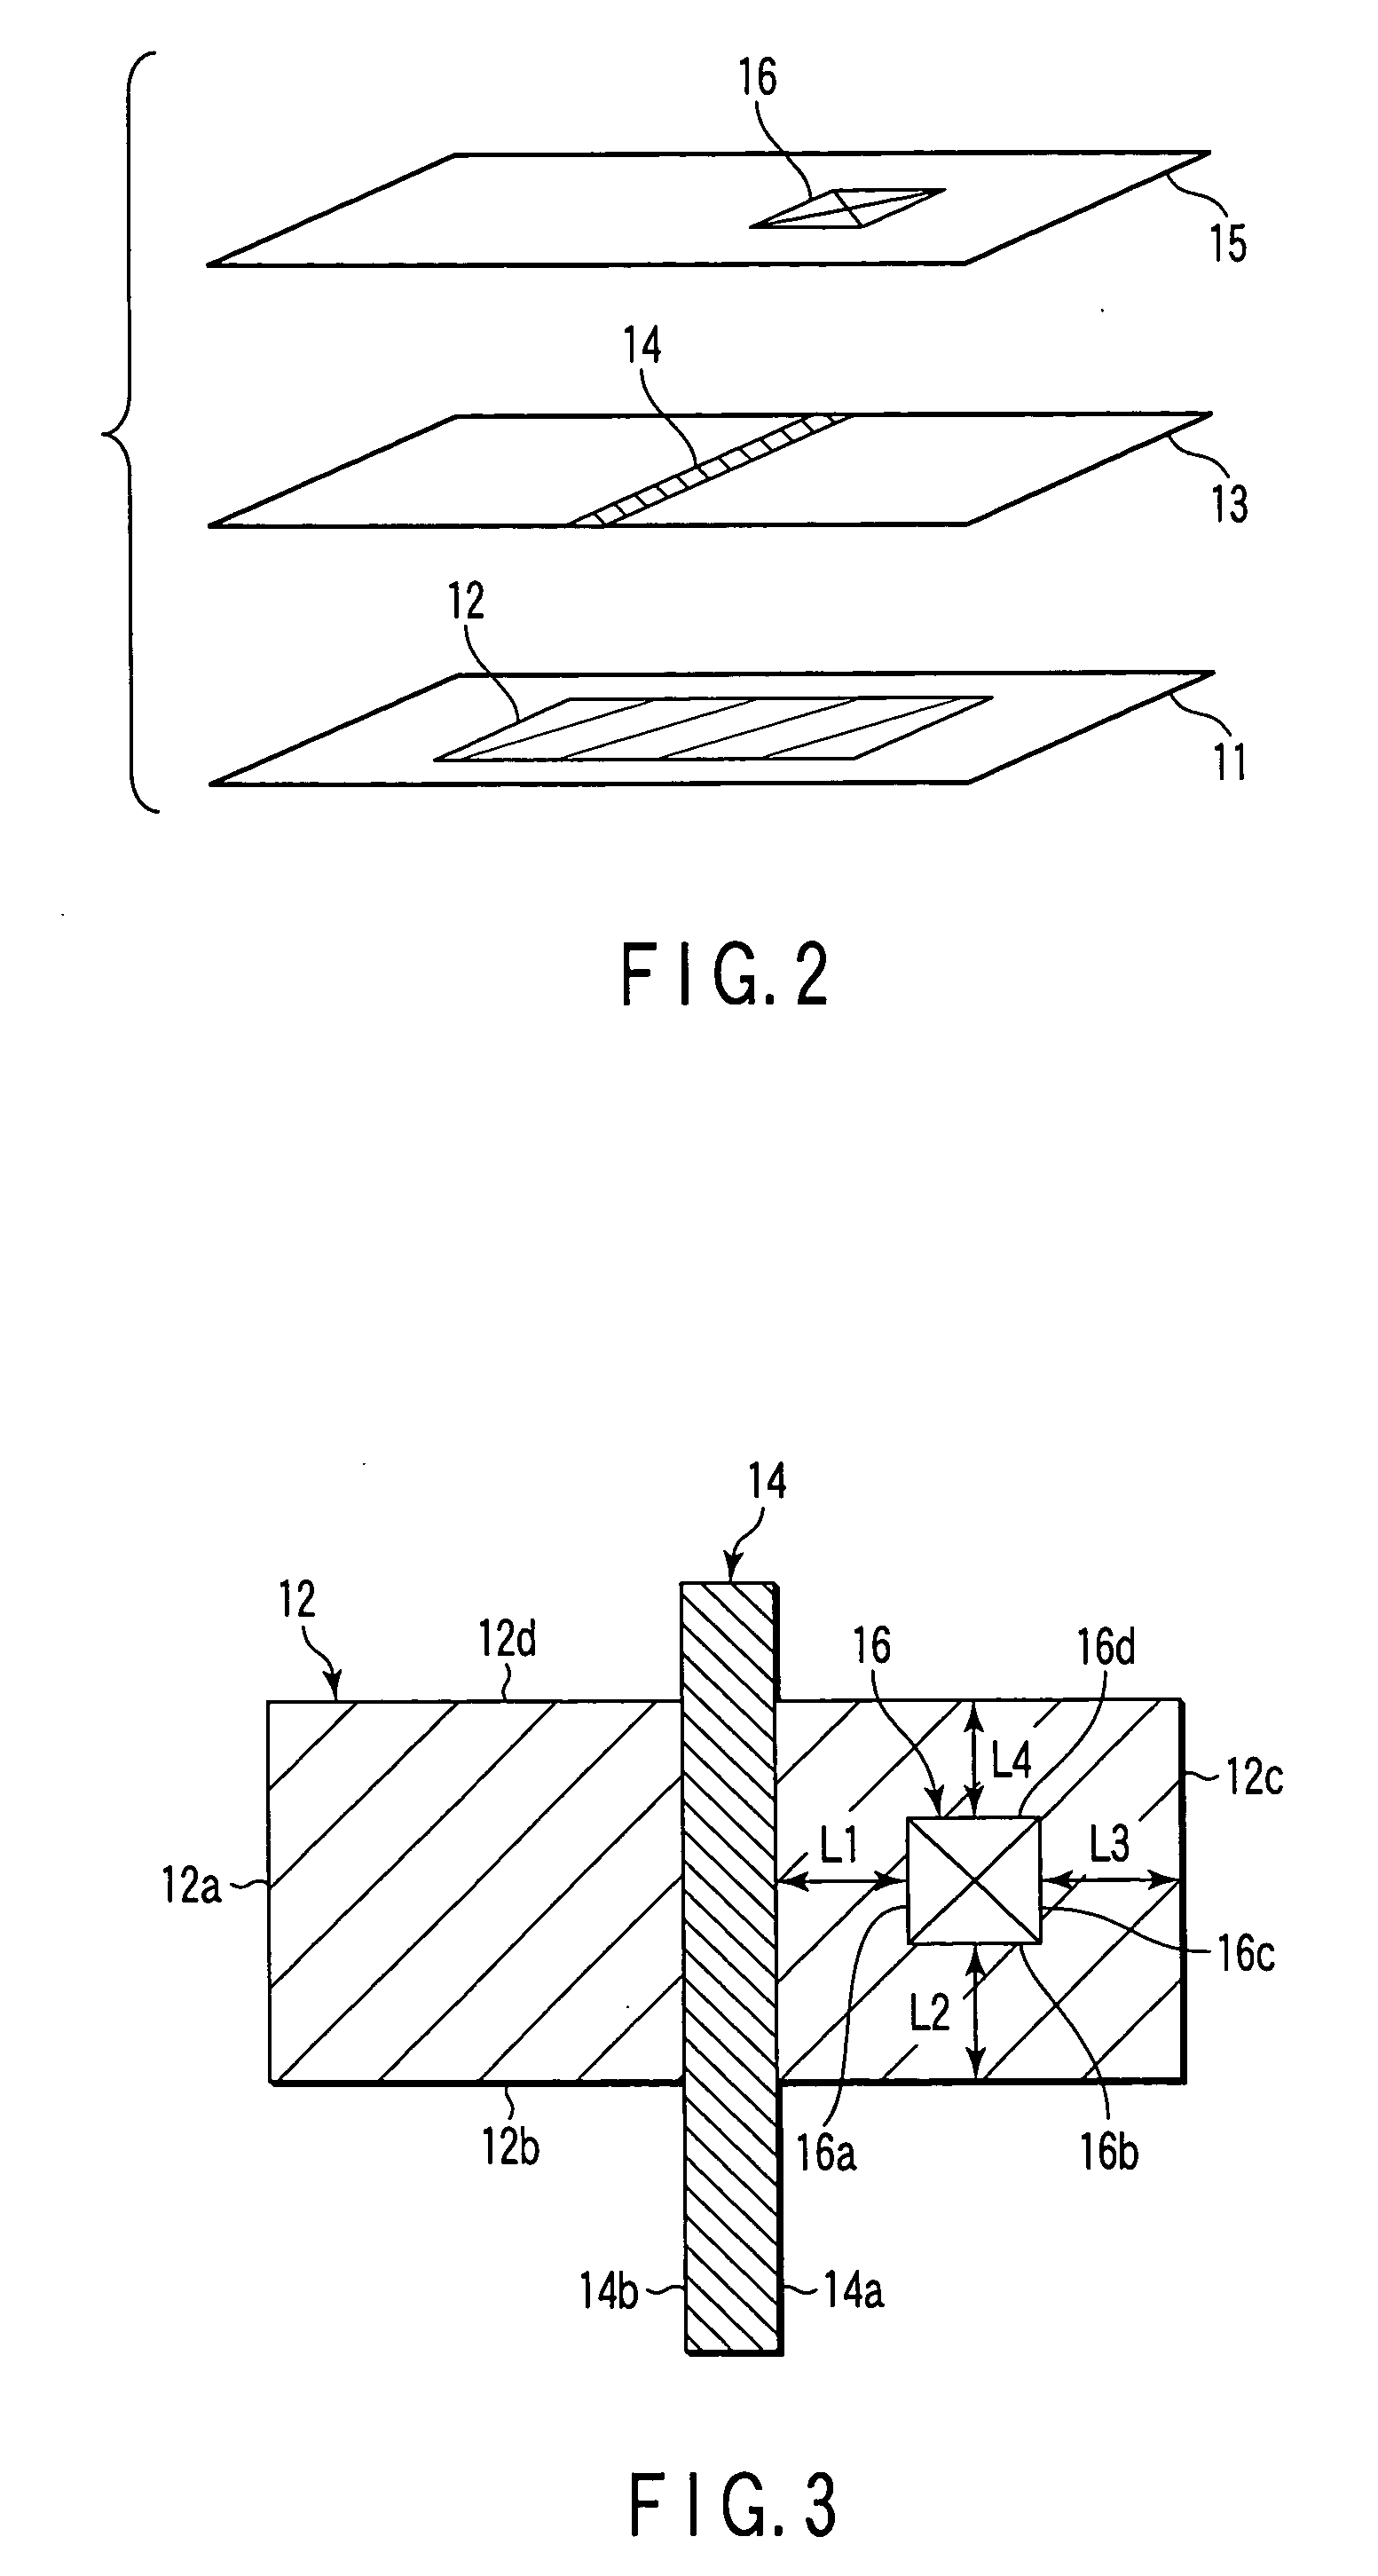 Pattern forming method and system, and method of manufacturing a semiconductor device